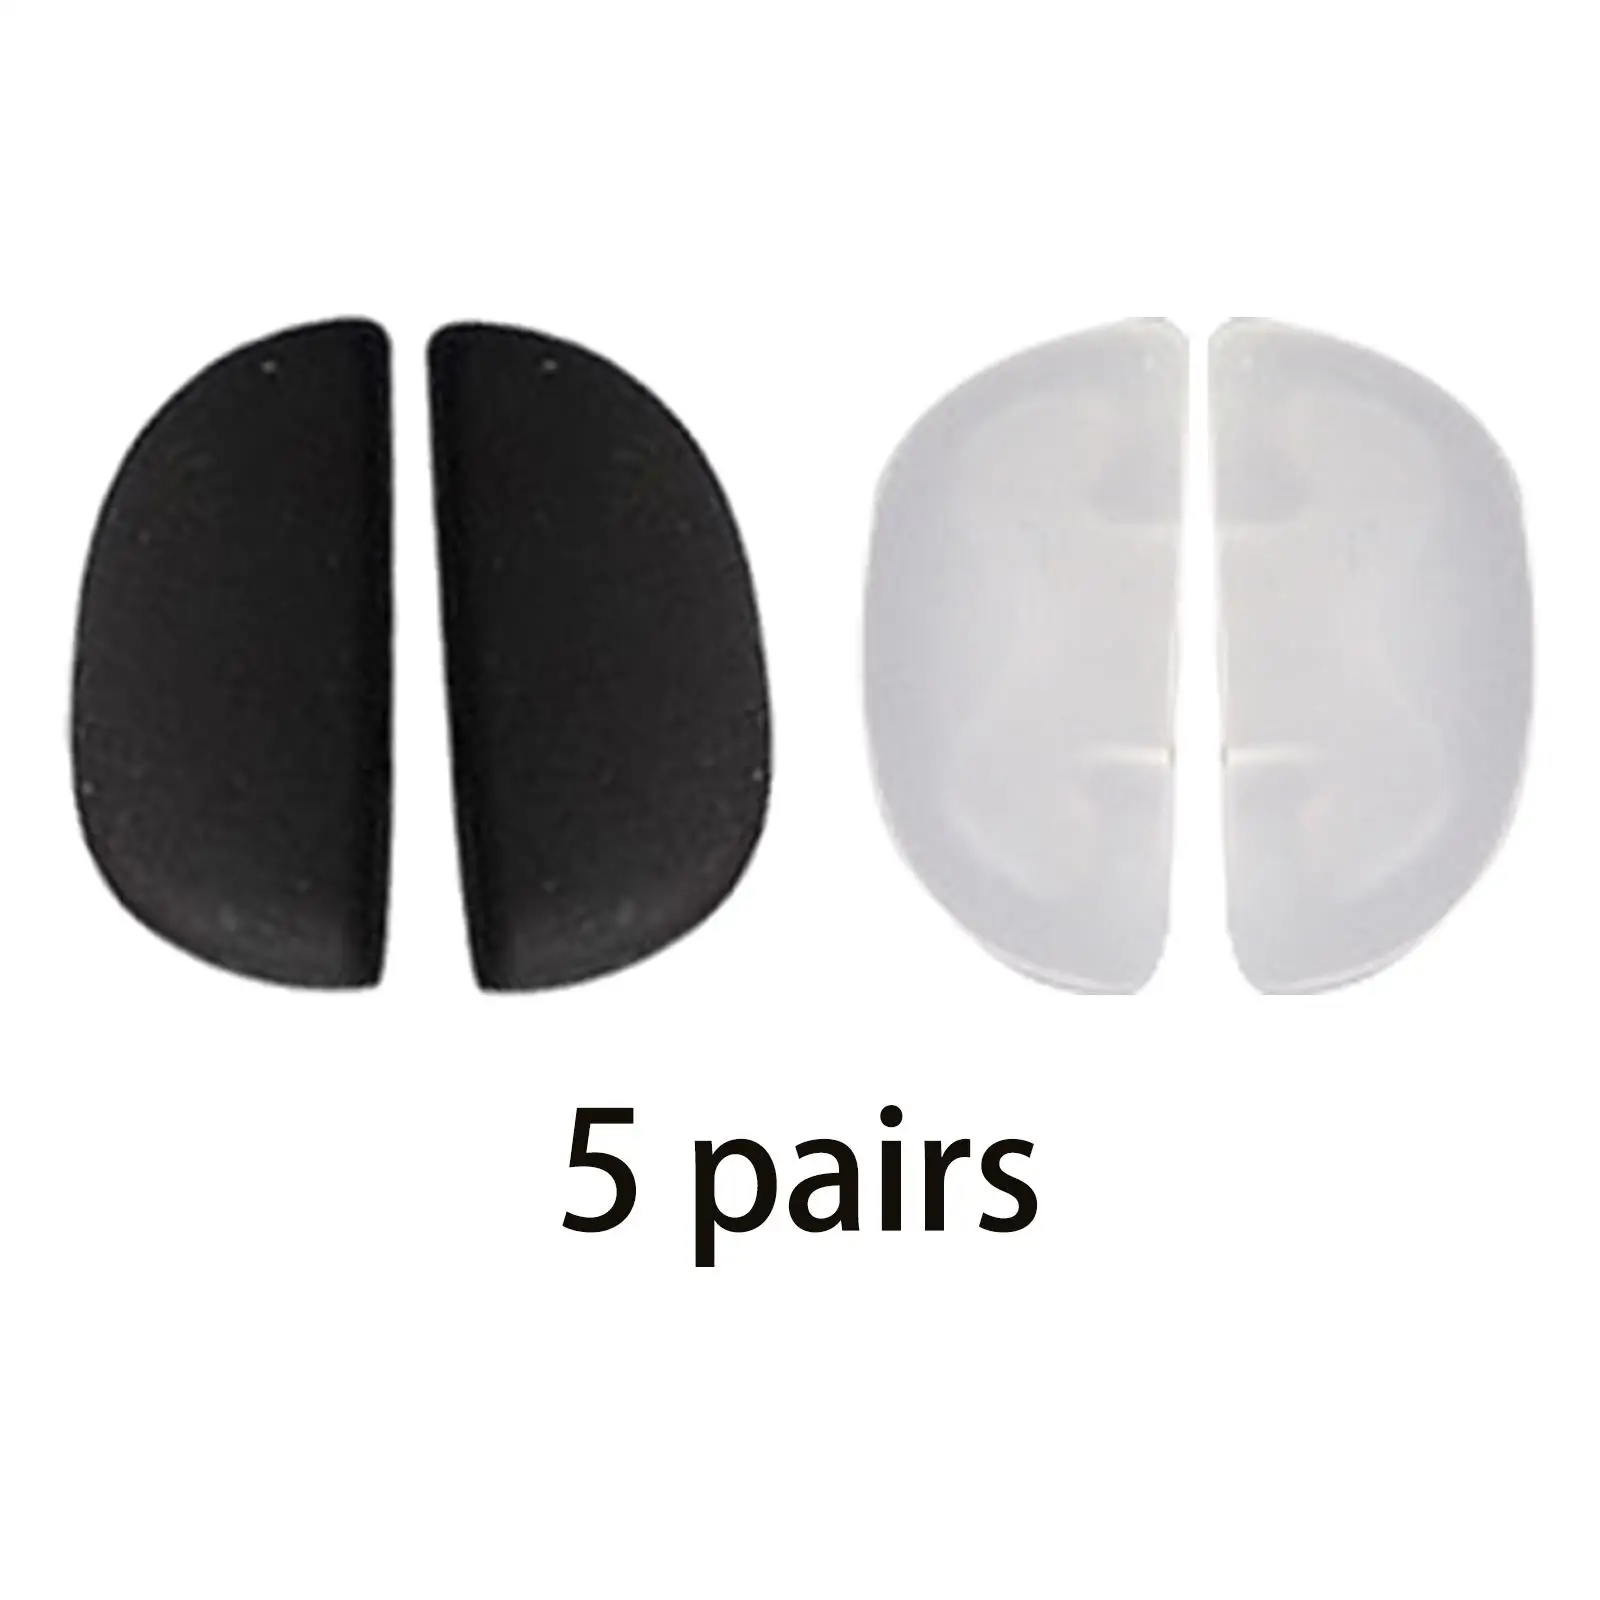 

10 Pieces Silicone Kids Eyeglass Nose Pads Replace Parts Anti Slip Comfortable Contoured Soft Thickened for Sunglasses Glasses